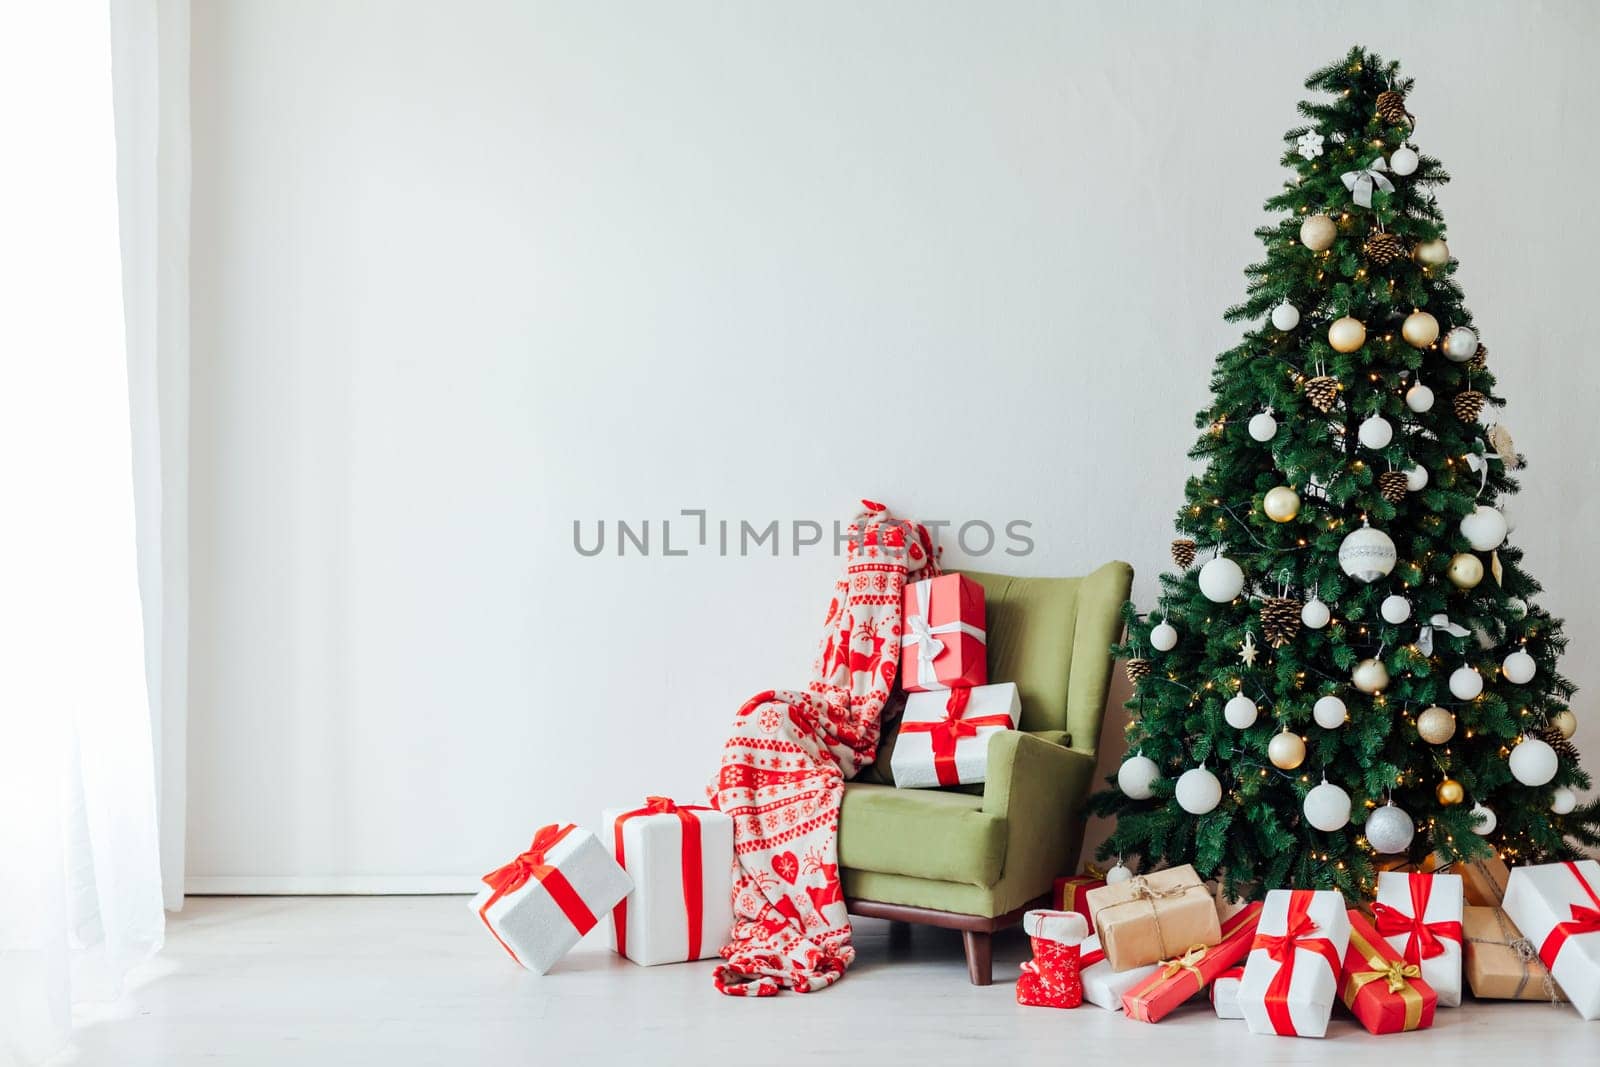 decor of the house with Christmas tree with gifts of the new year Thanksgiving holiday winter